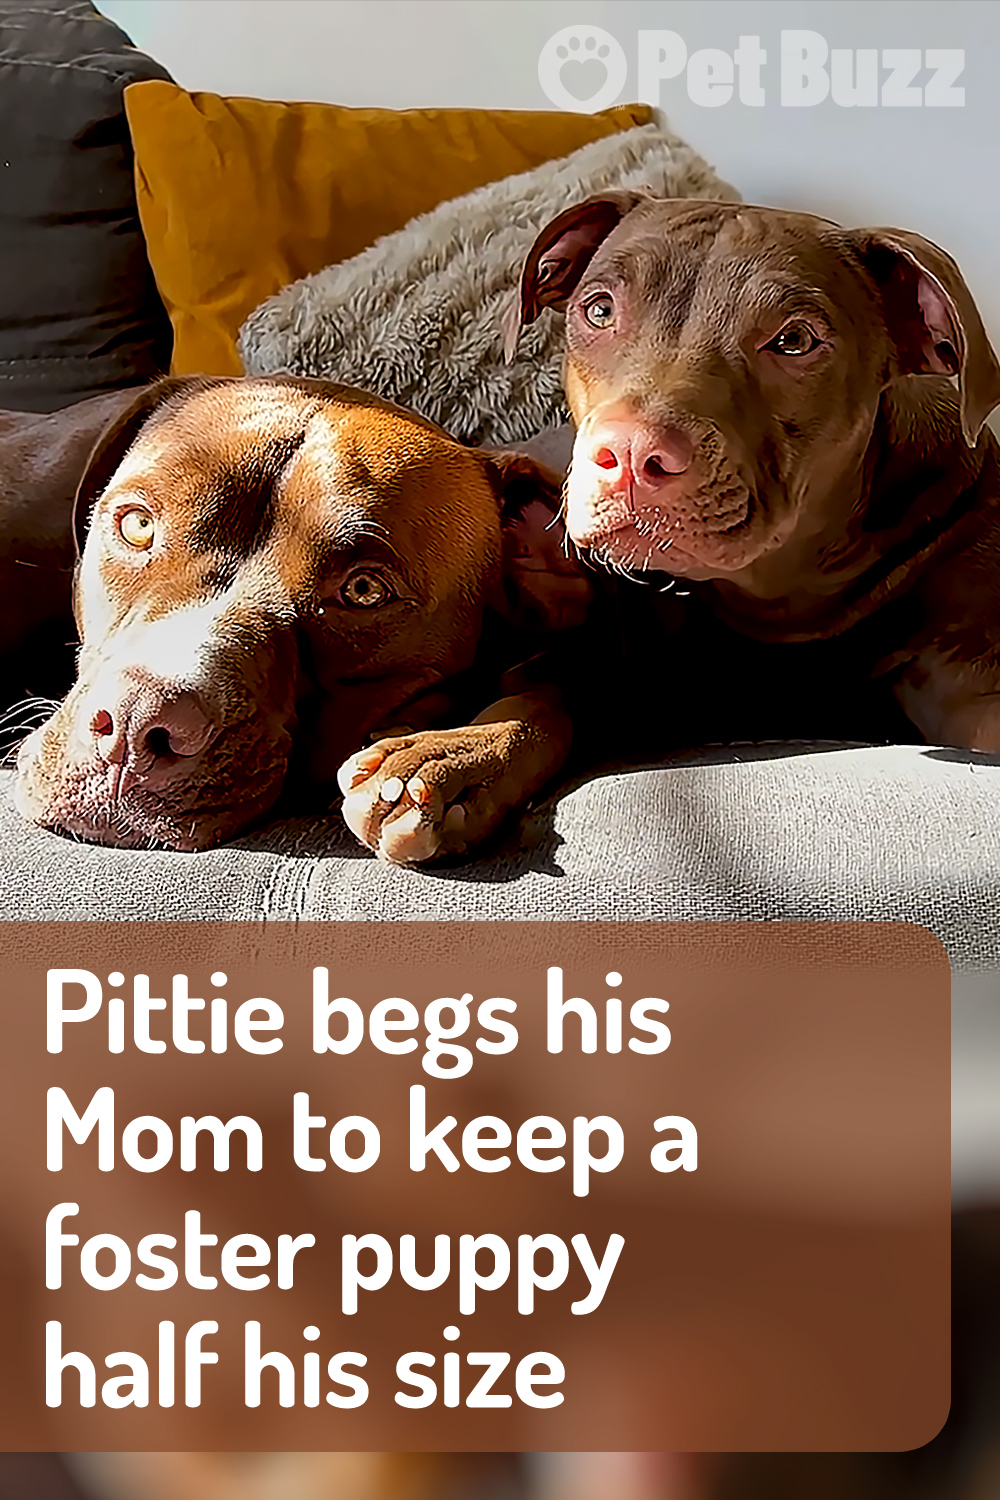 Pittie begs his Mom to keep a foster puppy half his size